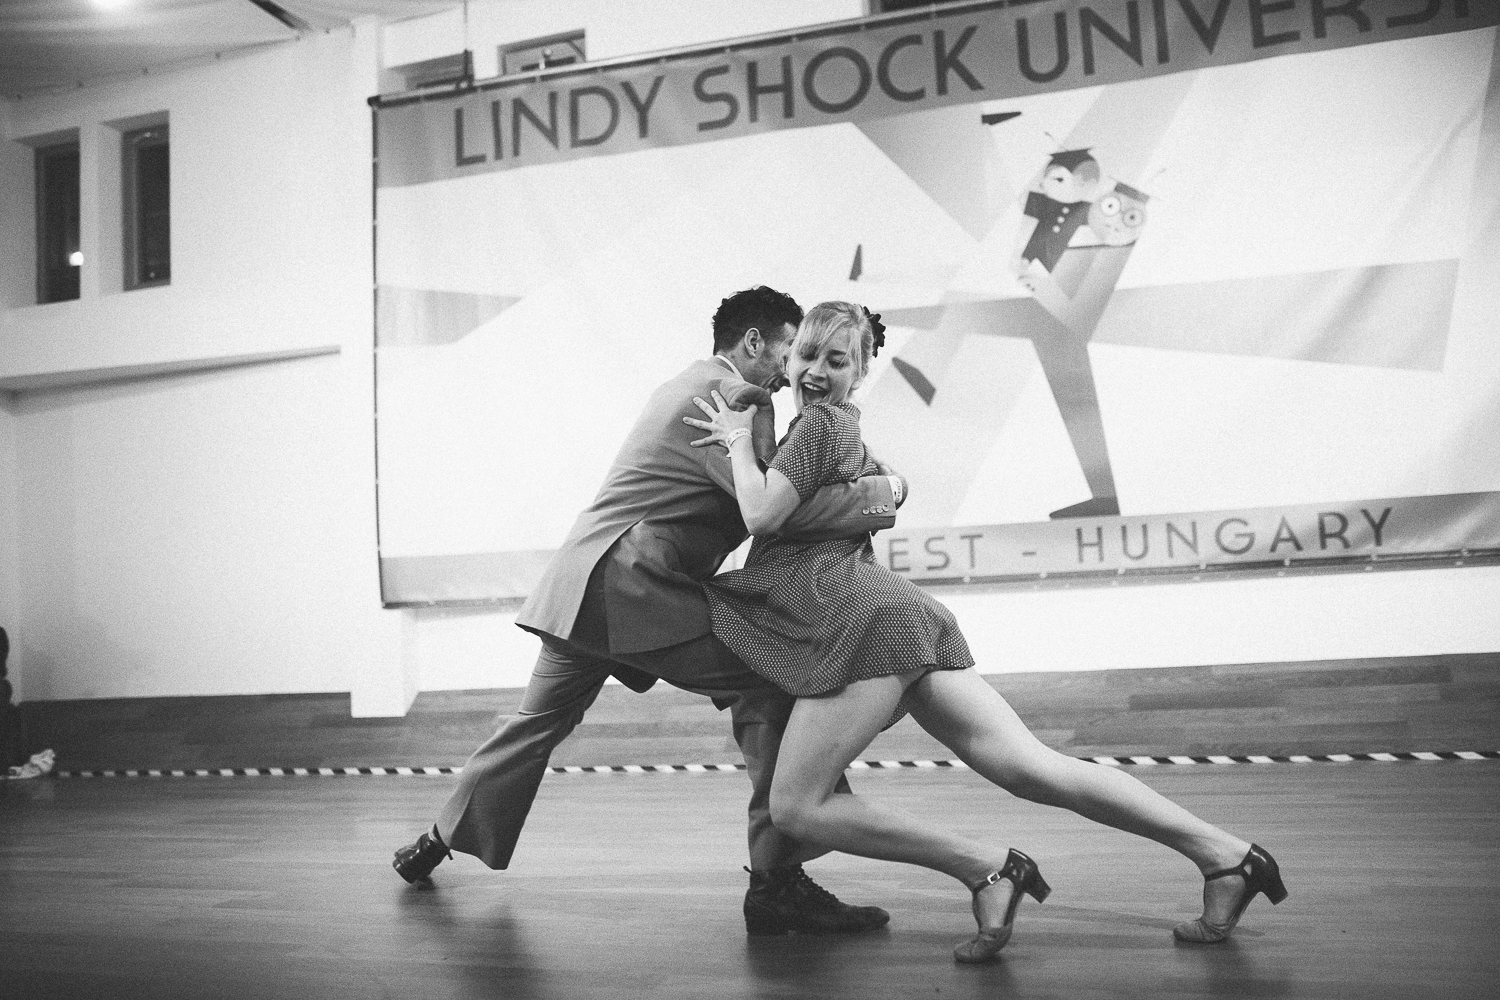  Lindy Shock 2015 - Photo Credit: For Dancers Only (http://d.pr/1fEEY) - http://www.ebobrie.com/lindy-shock-2015 